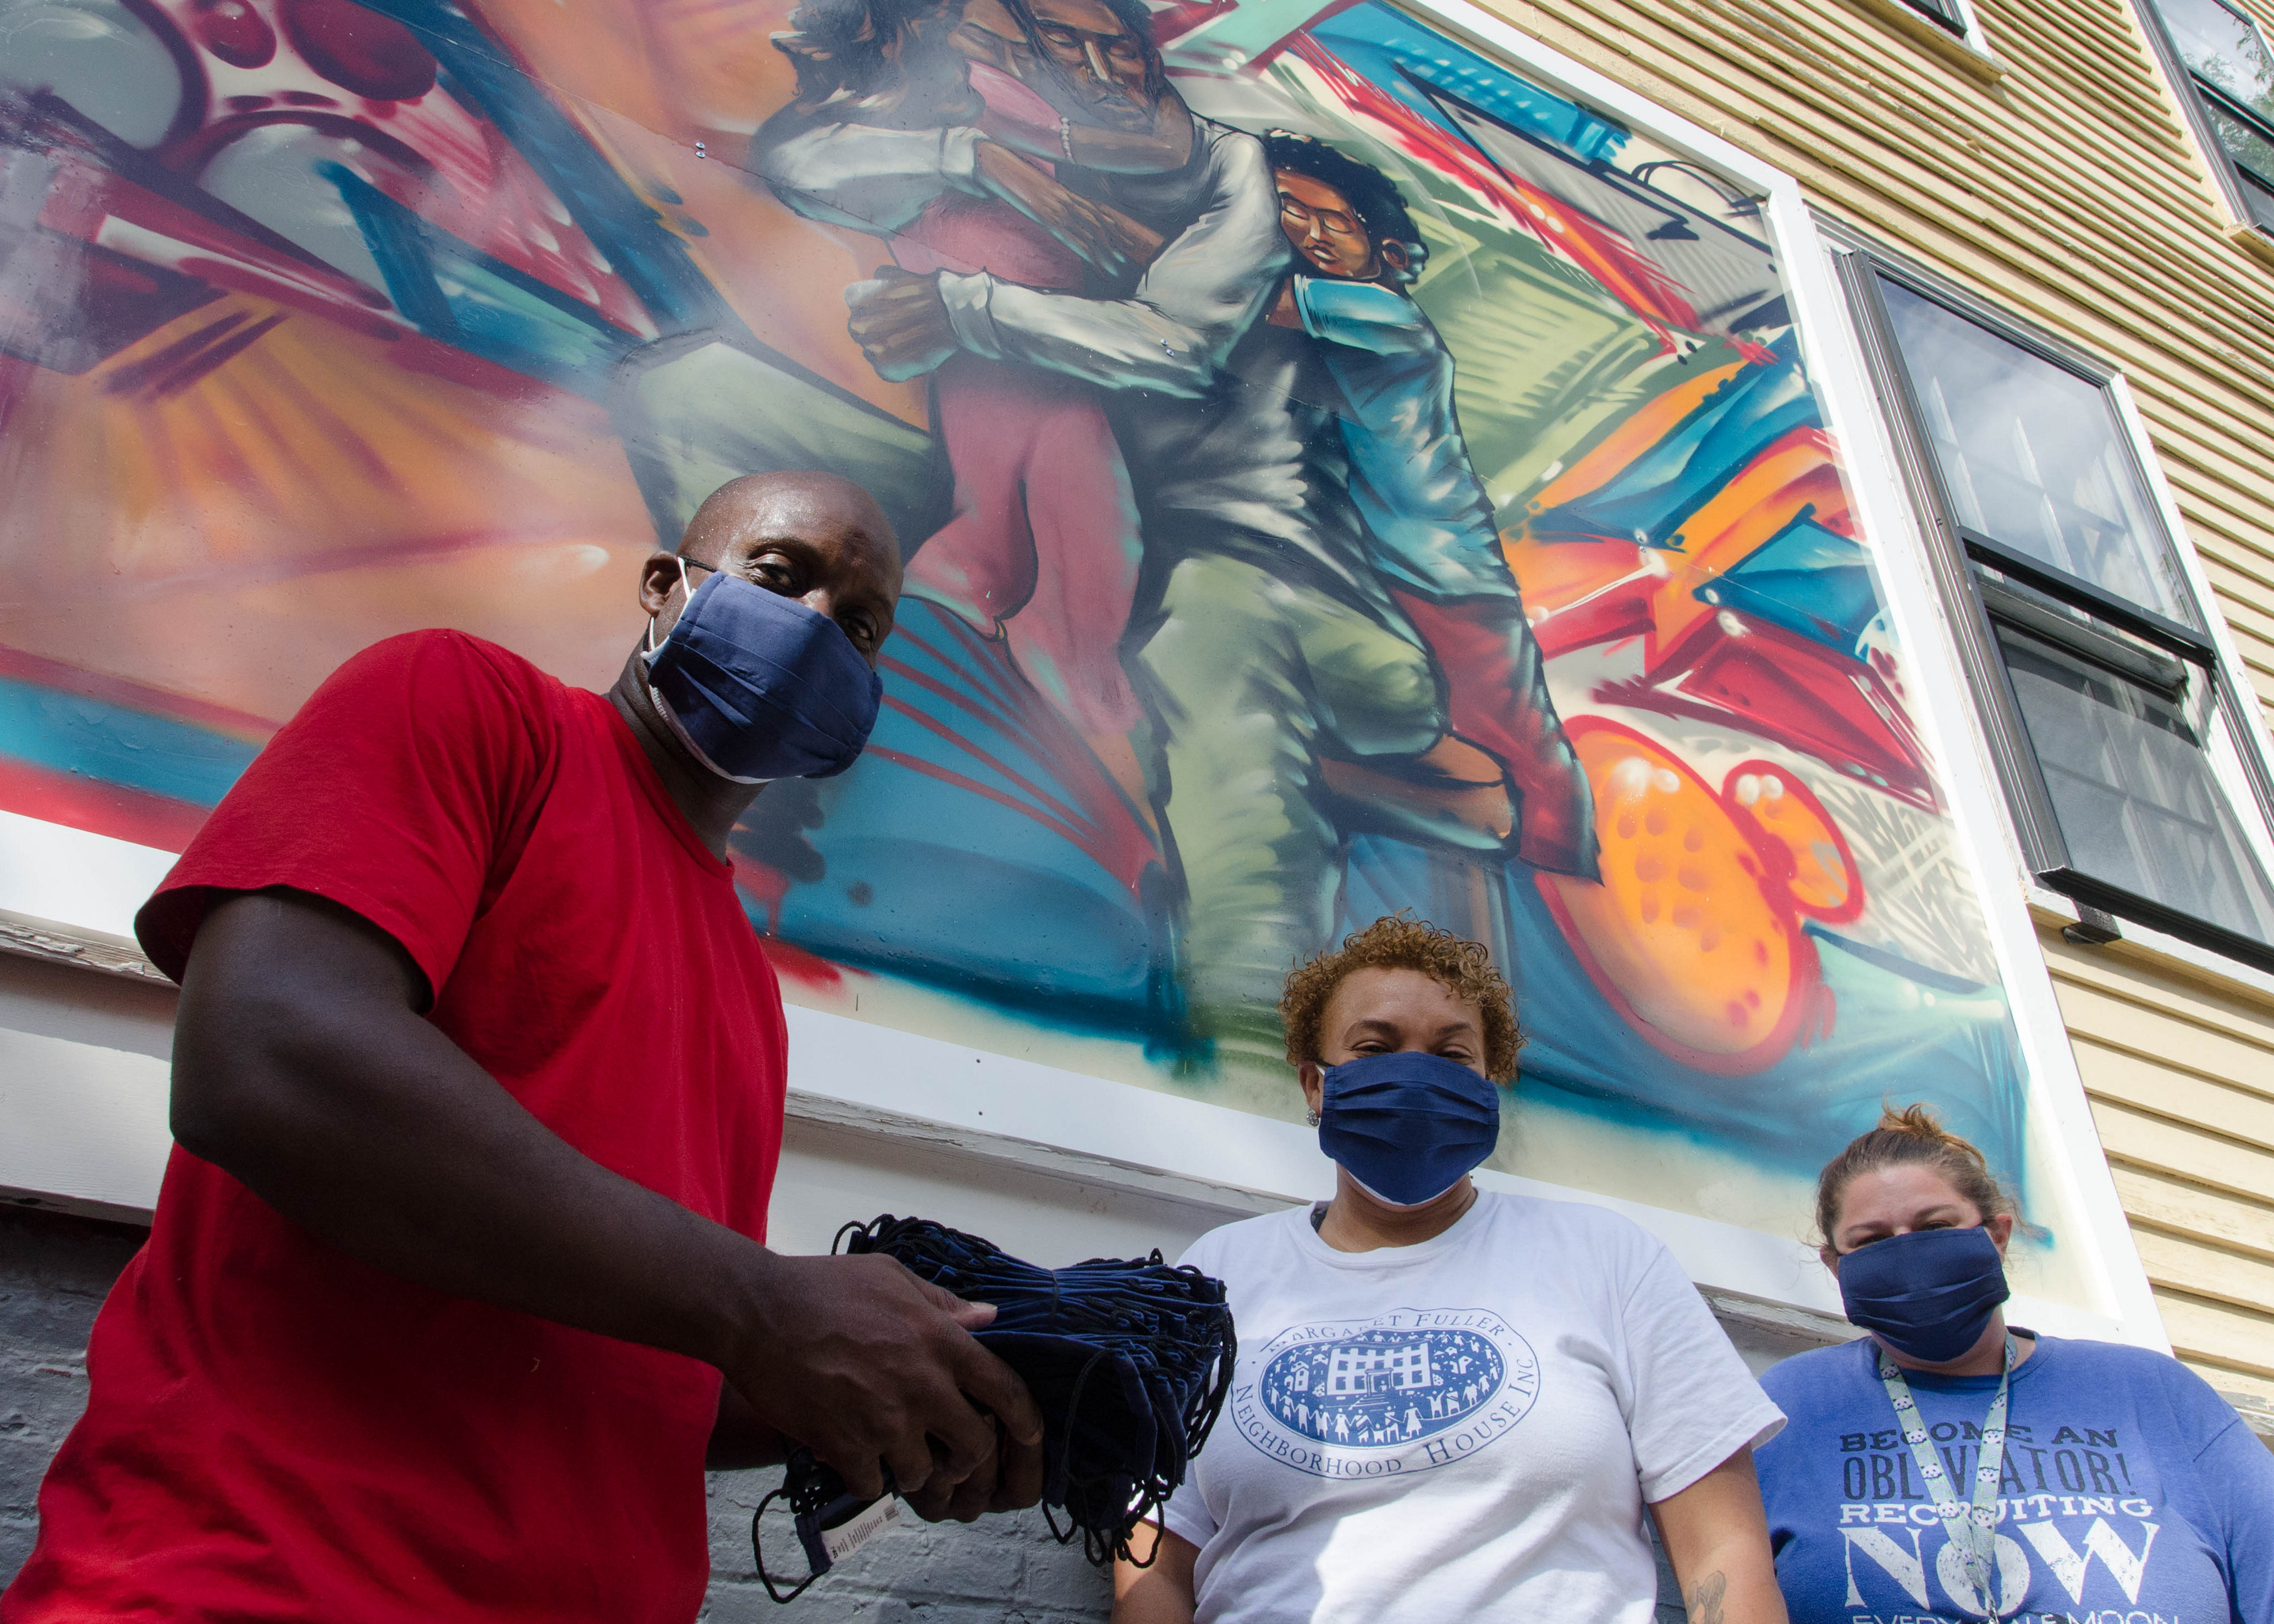 Staff and friends of Margaret Fuller Neighborhood House Distribute Masks. Photo by David Rabkin